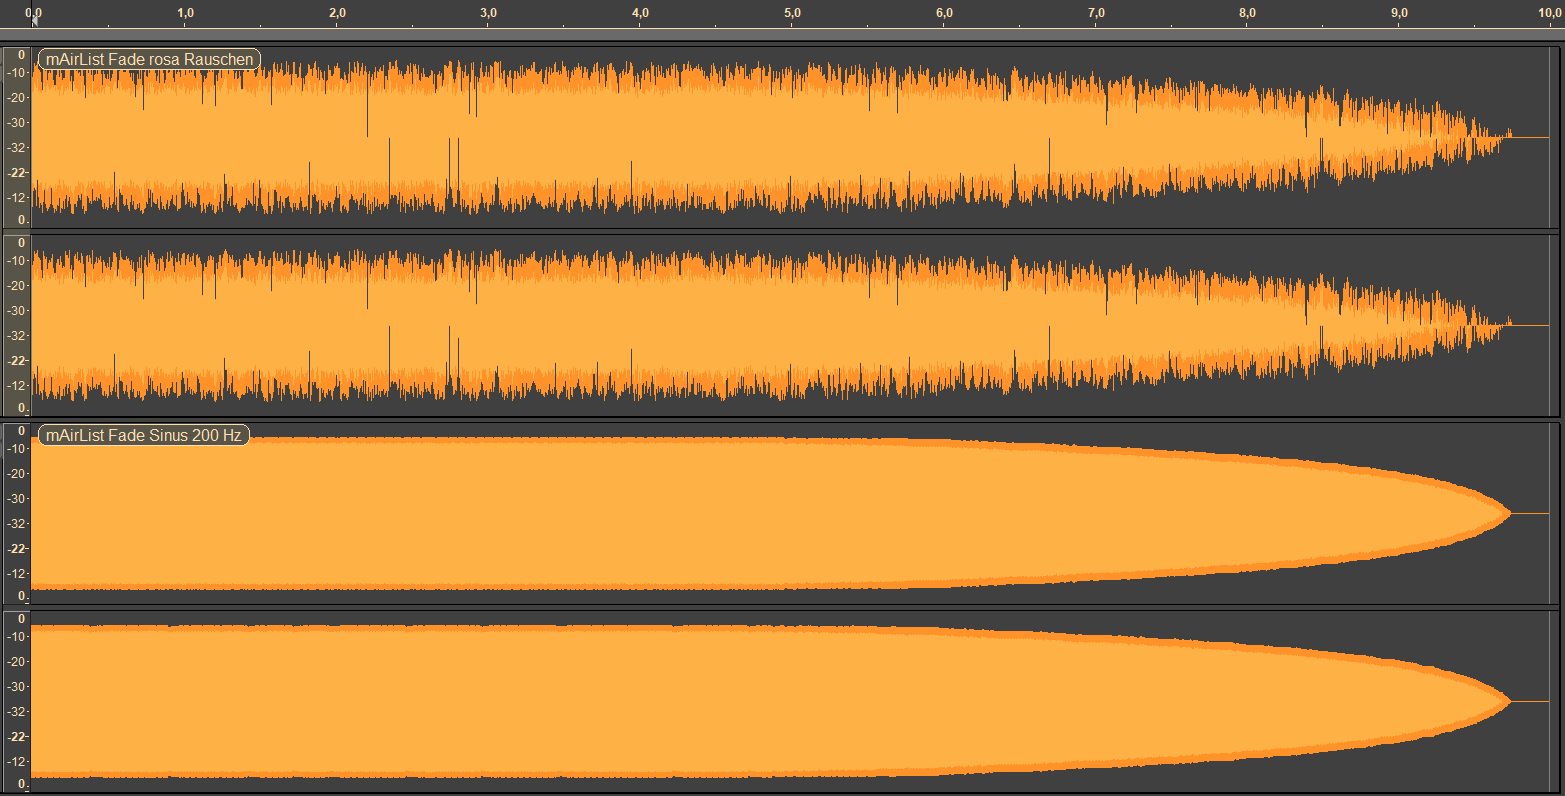 mAirList Fade recorded in Audacity.png